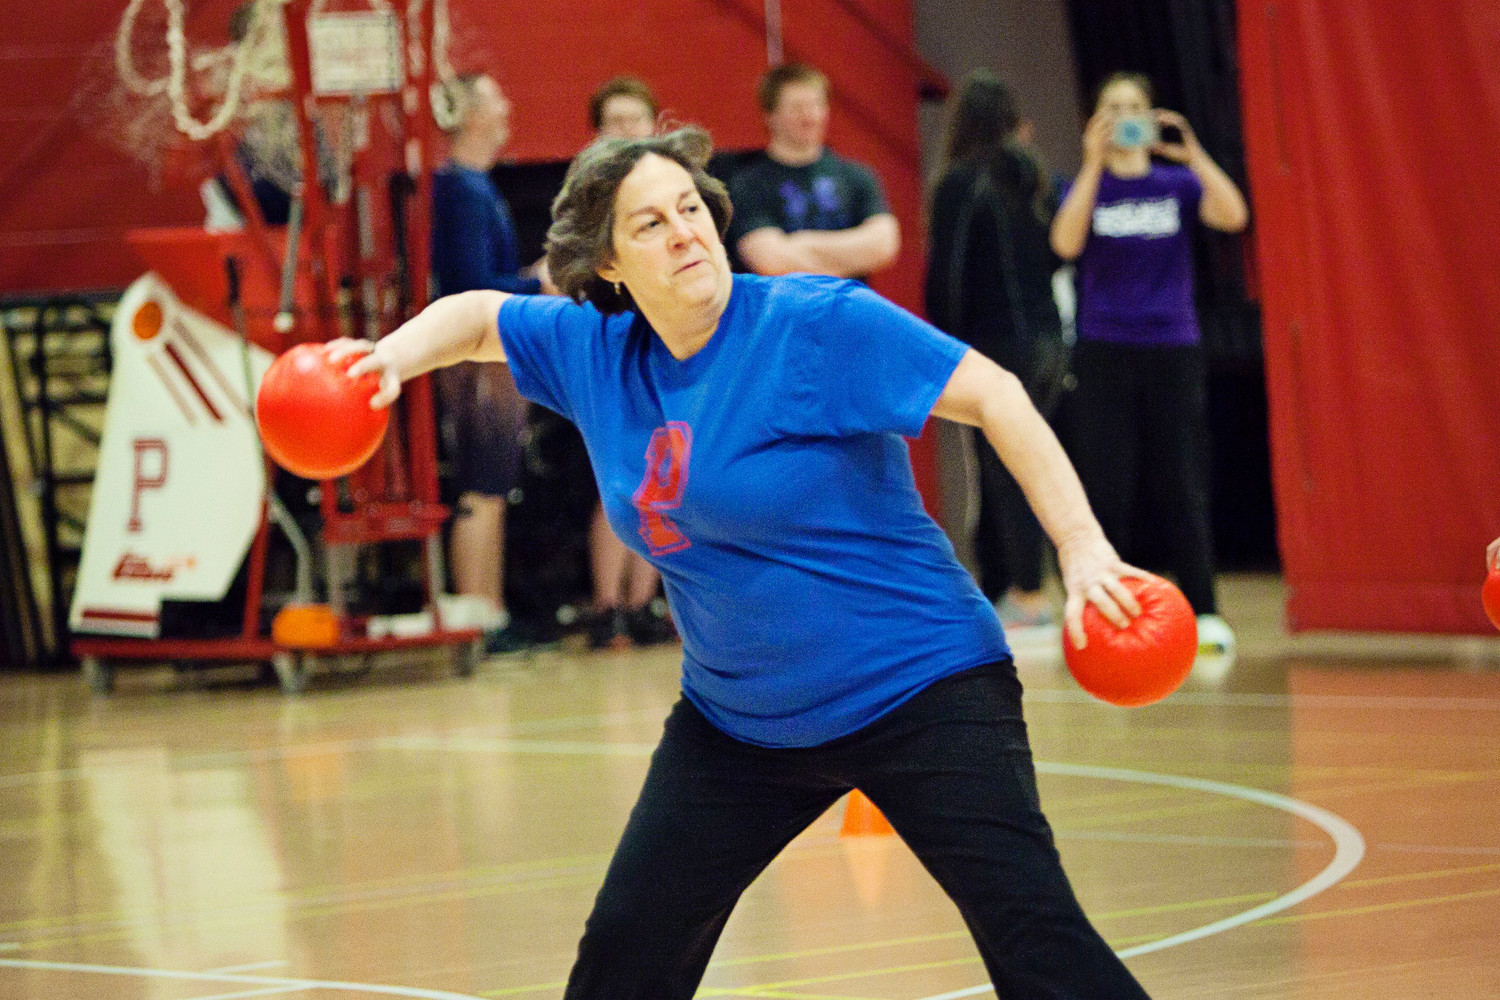 Emily Copeland, vice-chairwoman of the School Committee, hurls a ball while competing for The Hard Targets.